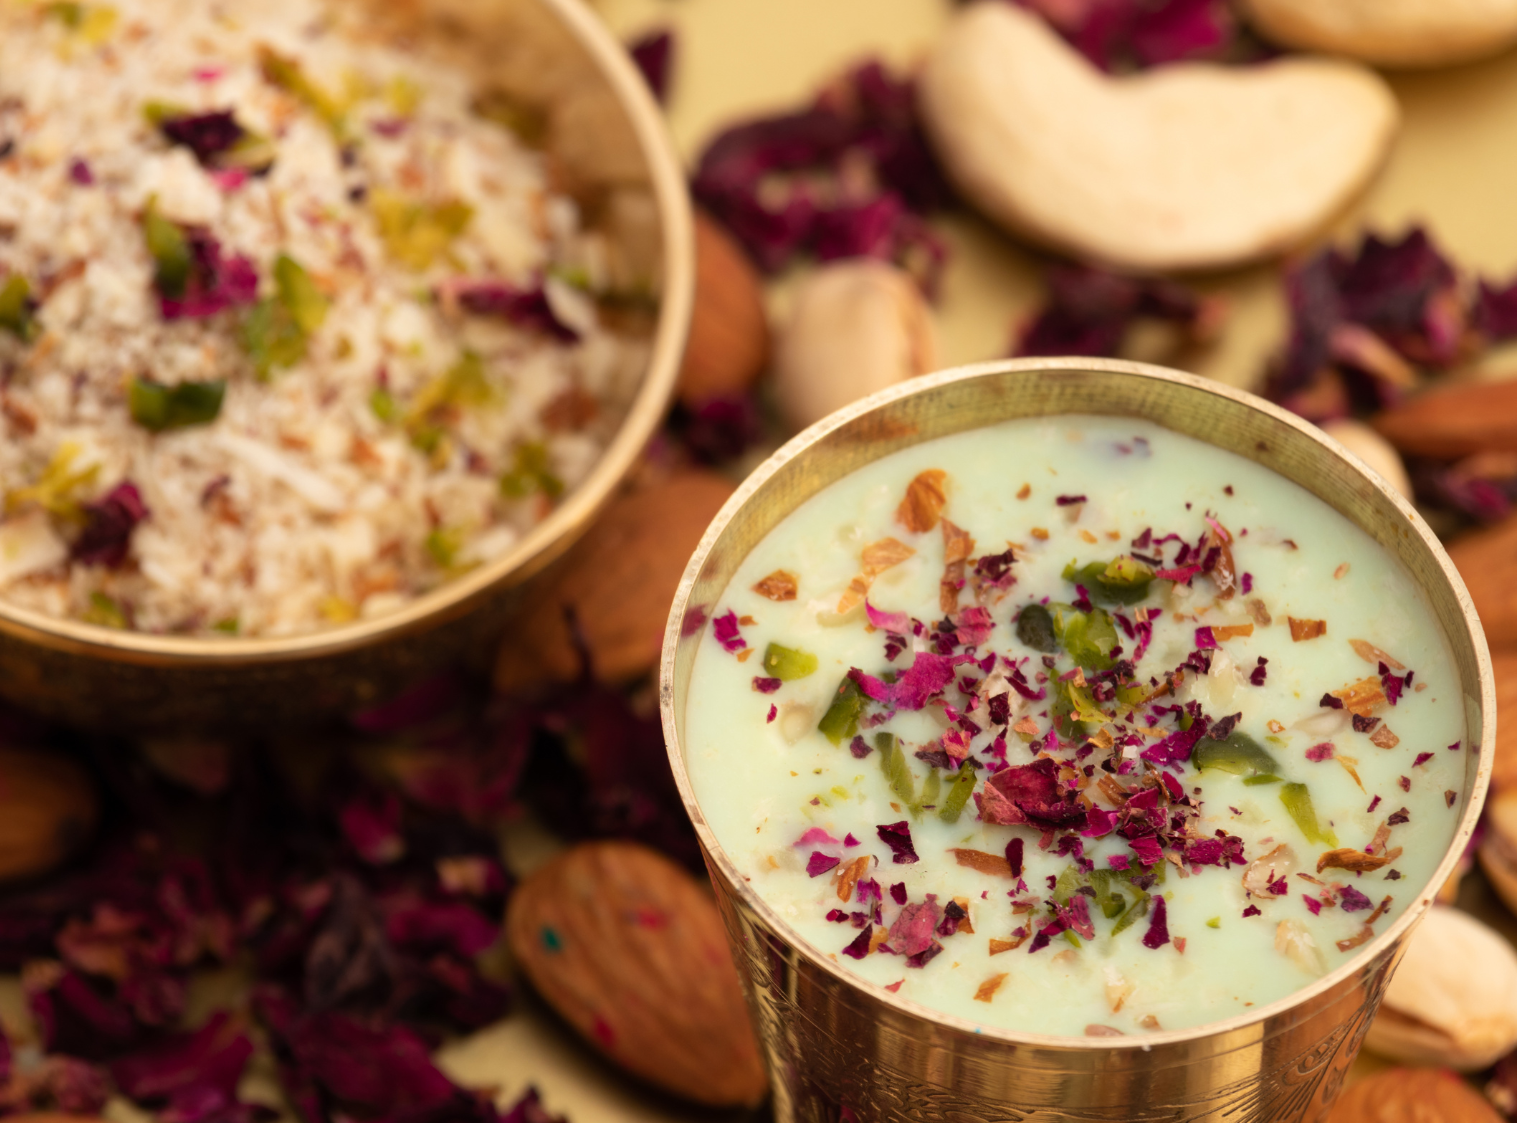 A 90-Year-Old Thandai Recipe From Lucknow